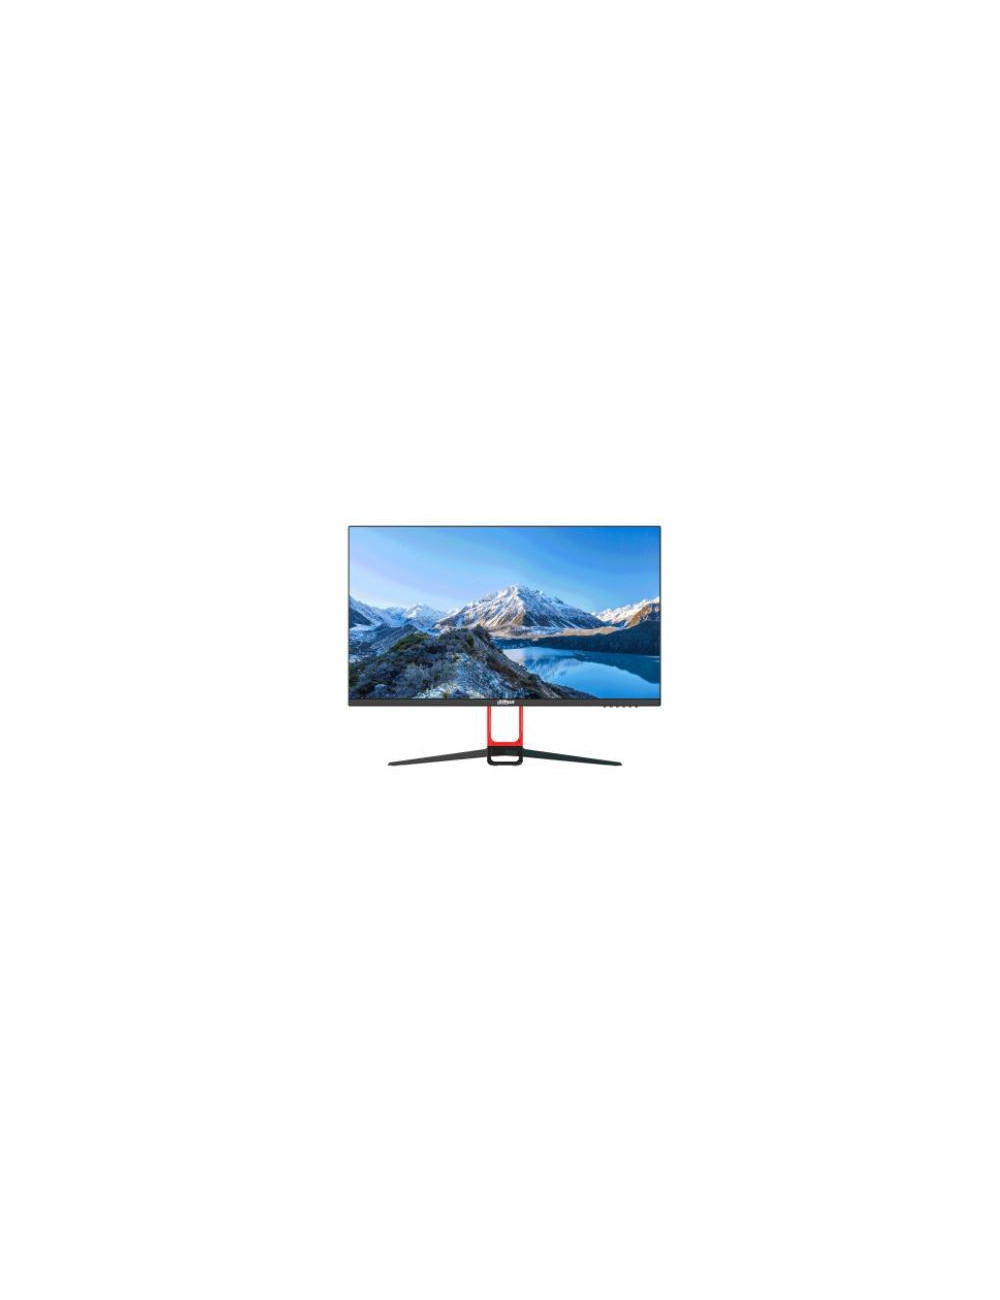 LCD Monitor|DAHUA|LM28-F400|28"|Gaming|Panel IPS|3840x2160|16:9|60Hz|5 ms|Speakers|LM28-F400